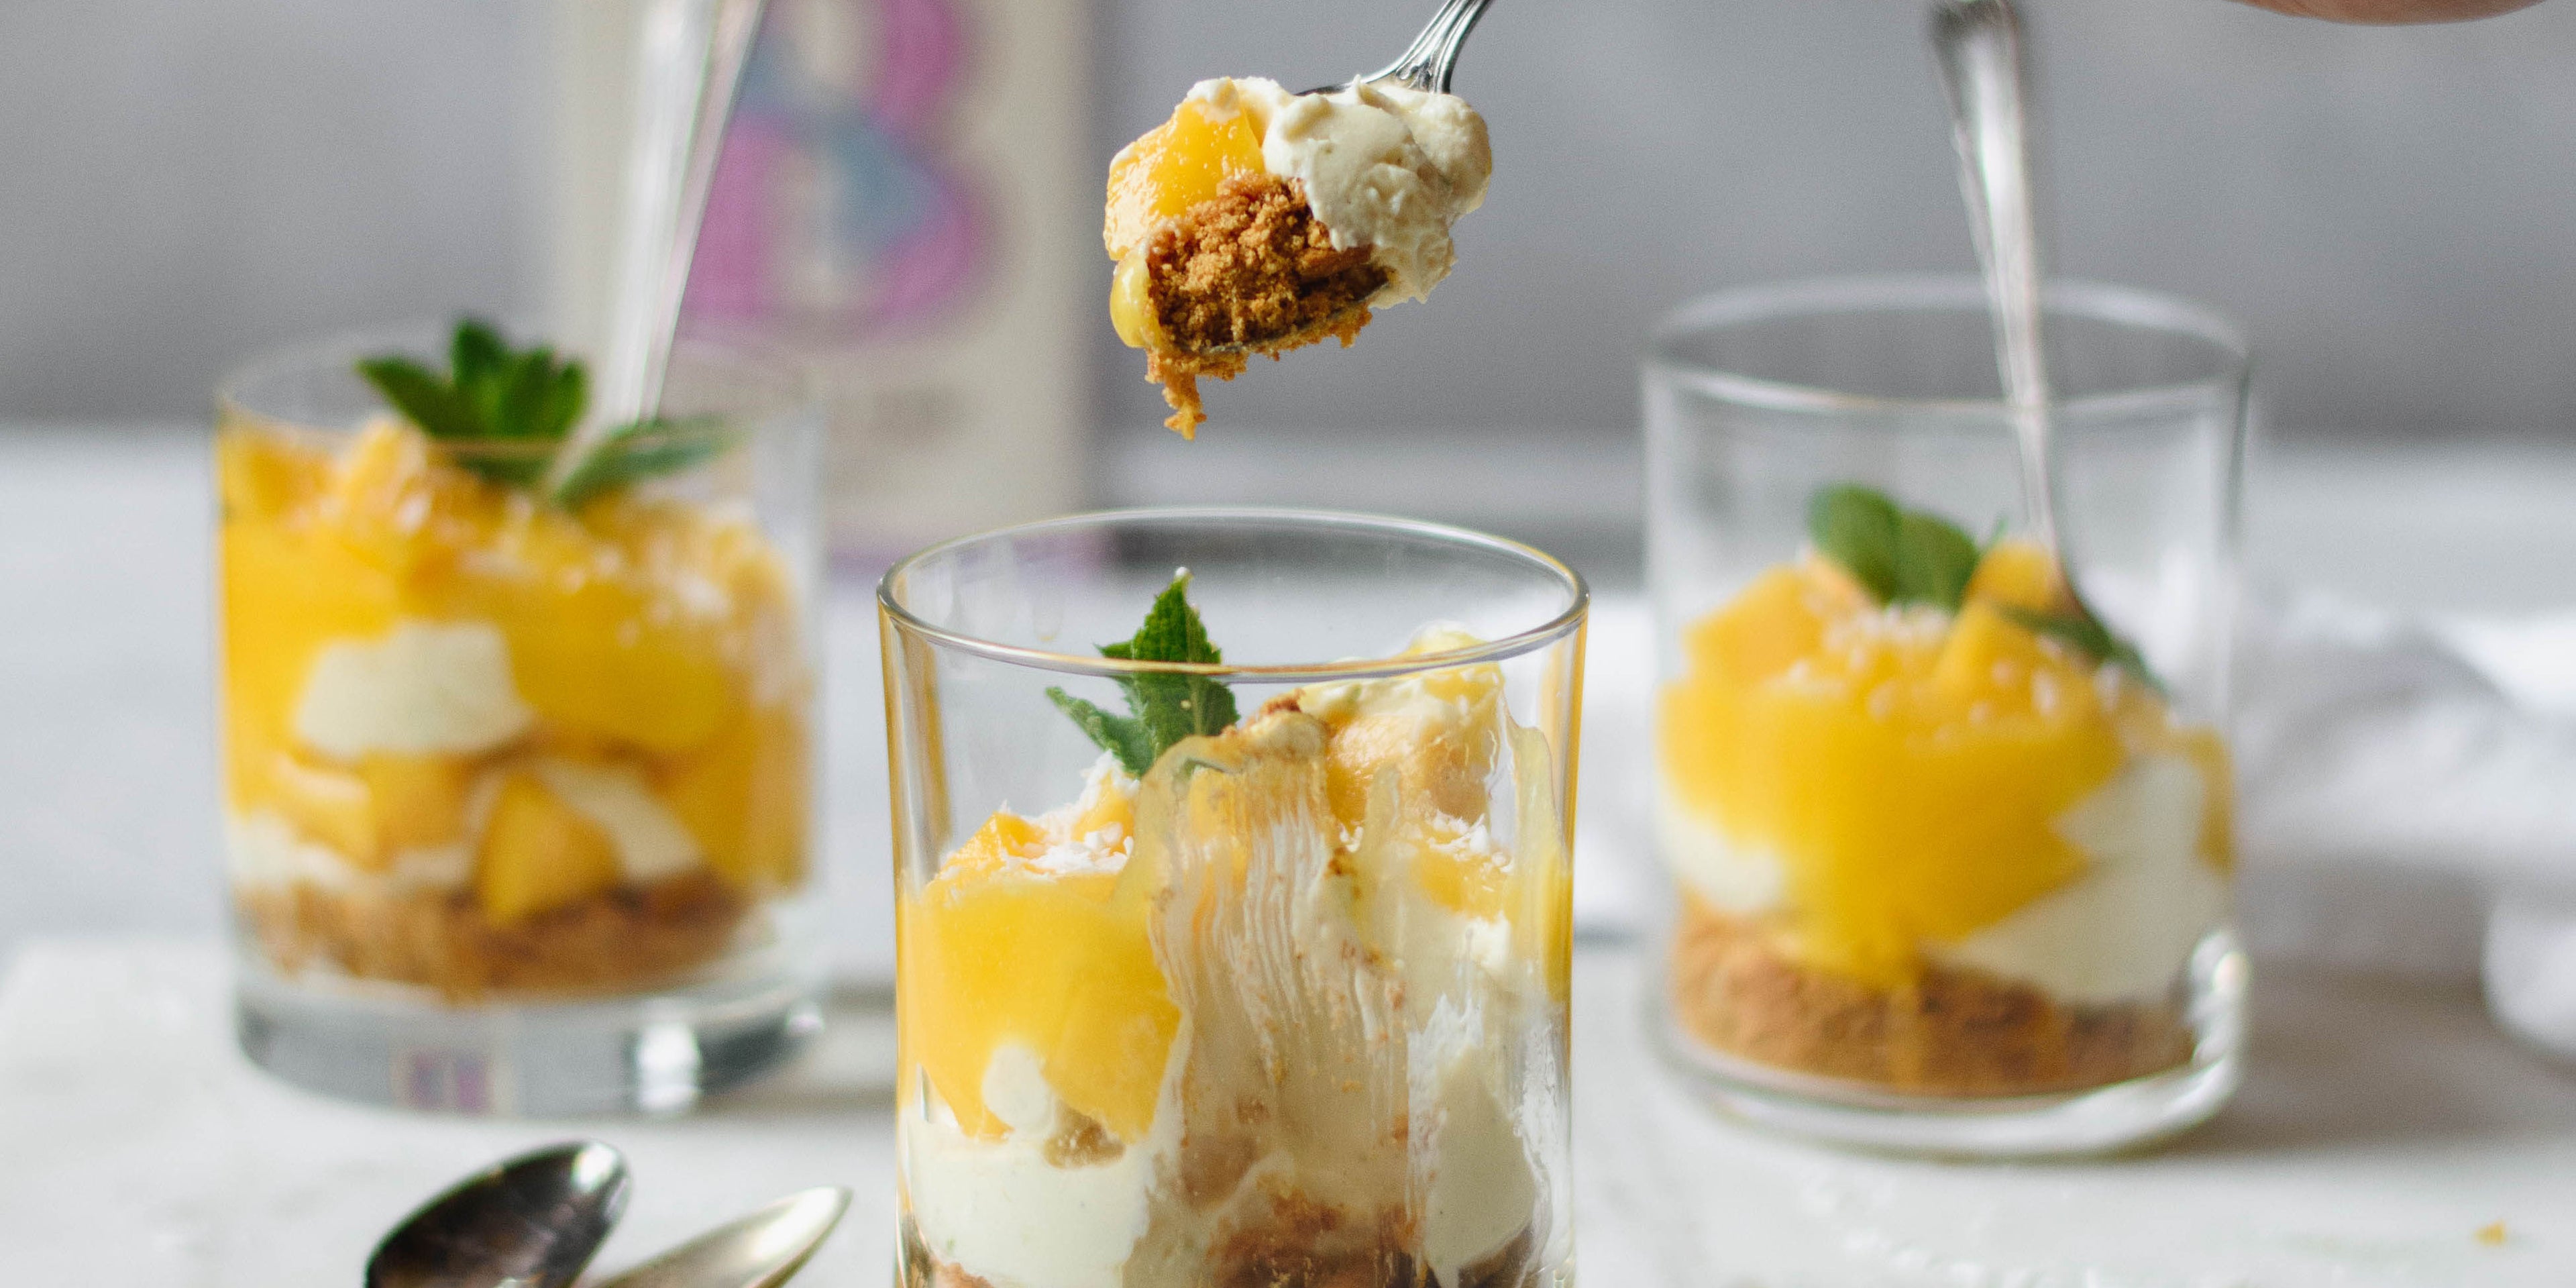 3 small glasses of mango syllabub with sprig of mint on top and two spoons. Spoonful of dessert scooped out